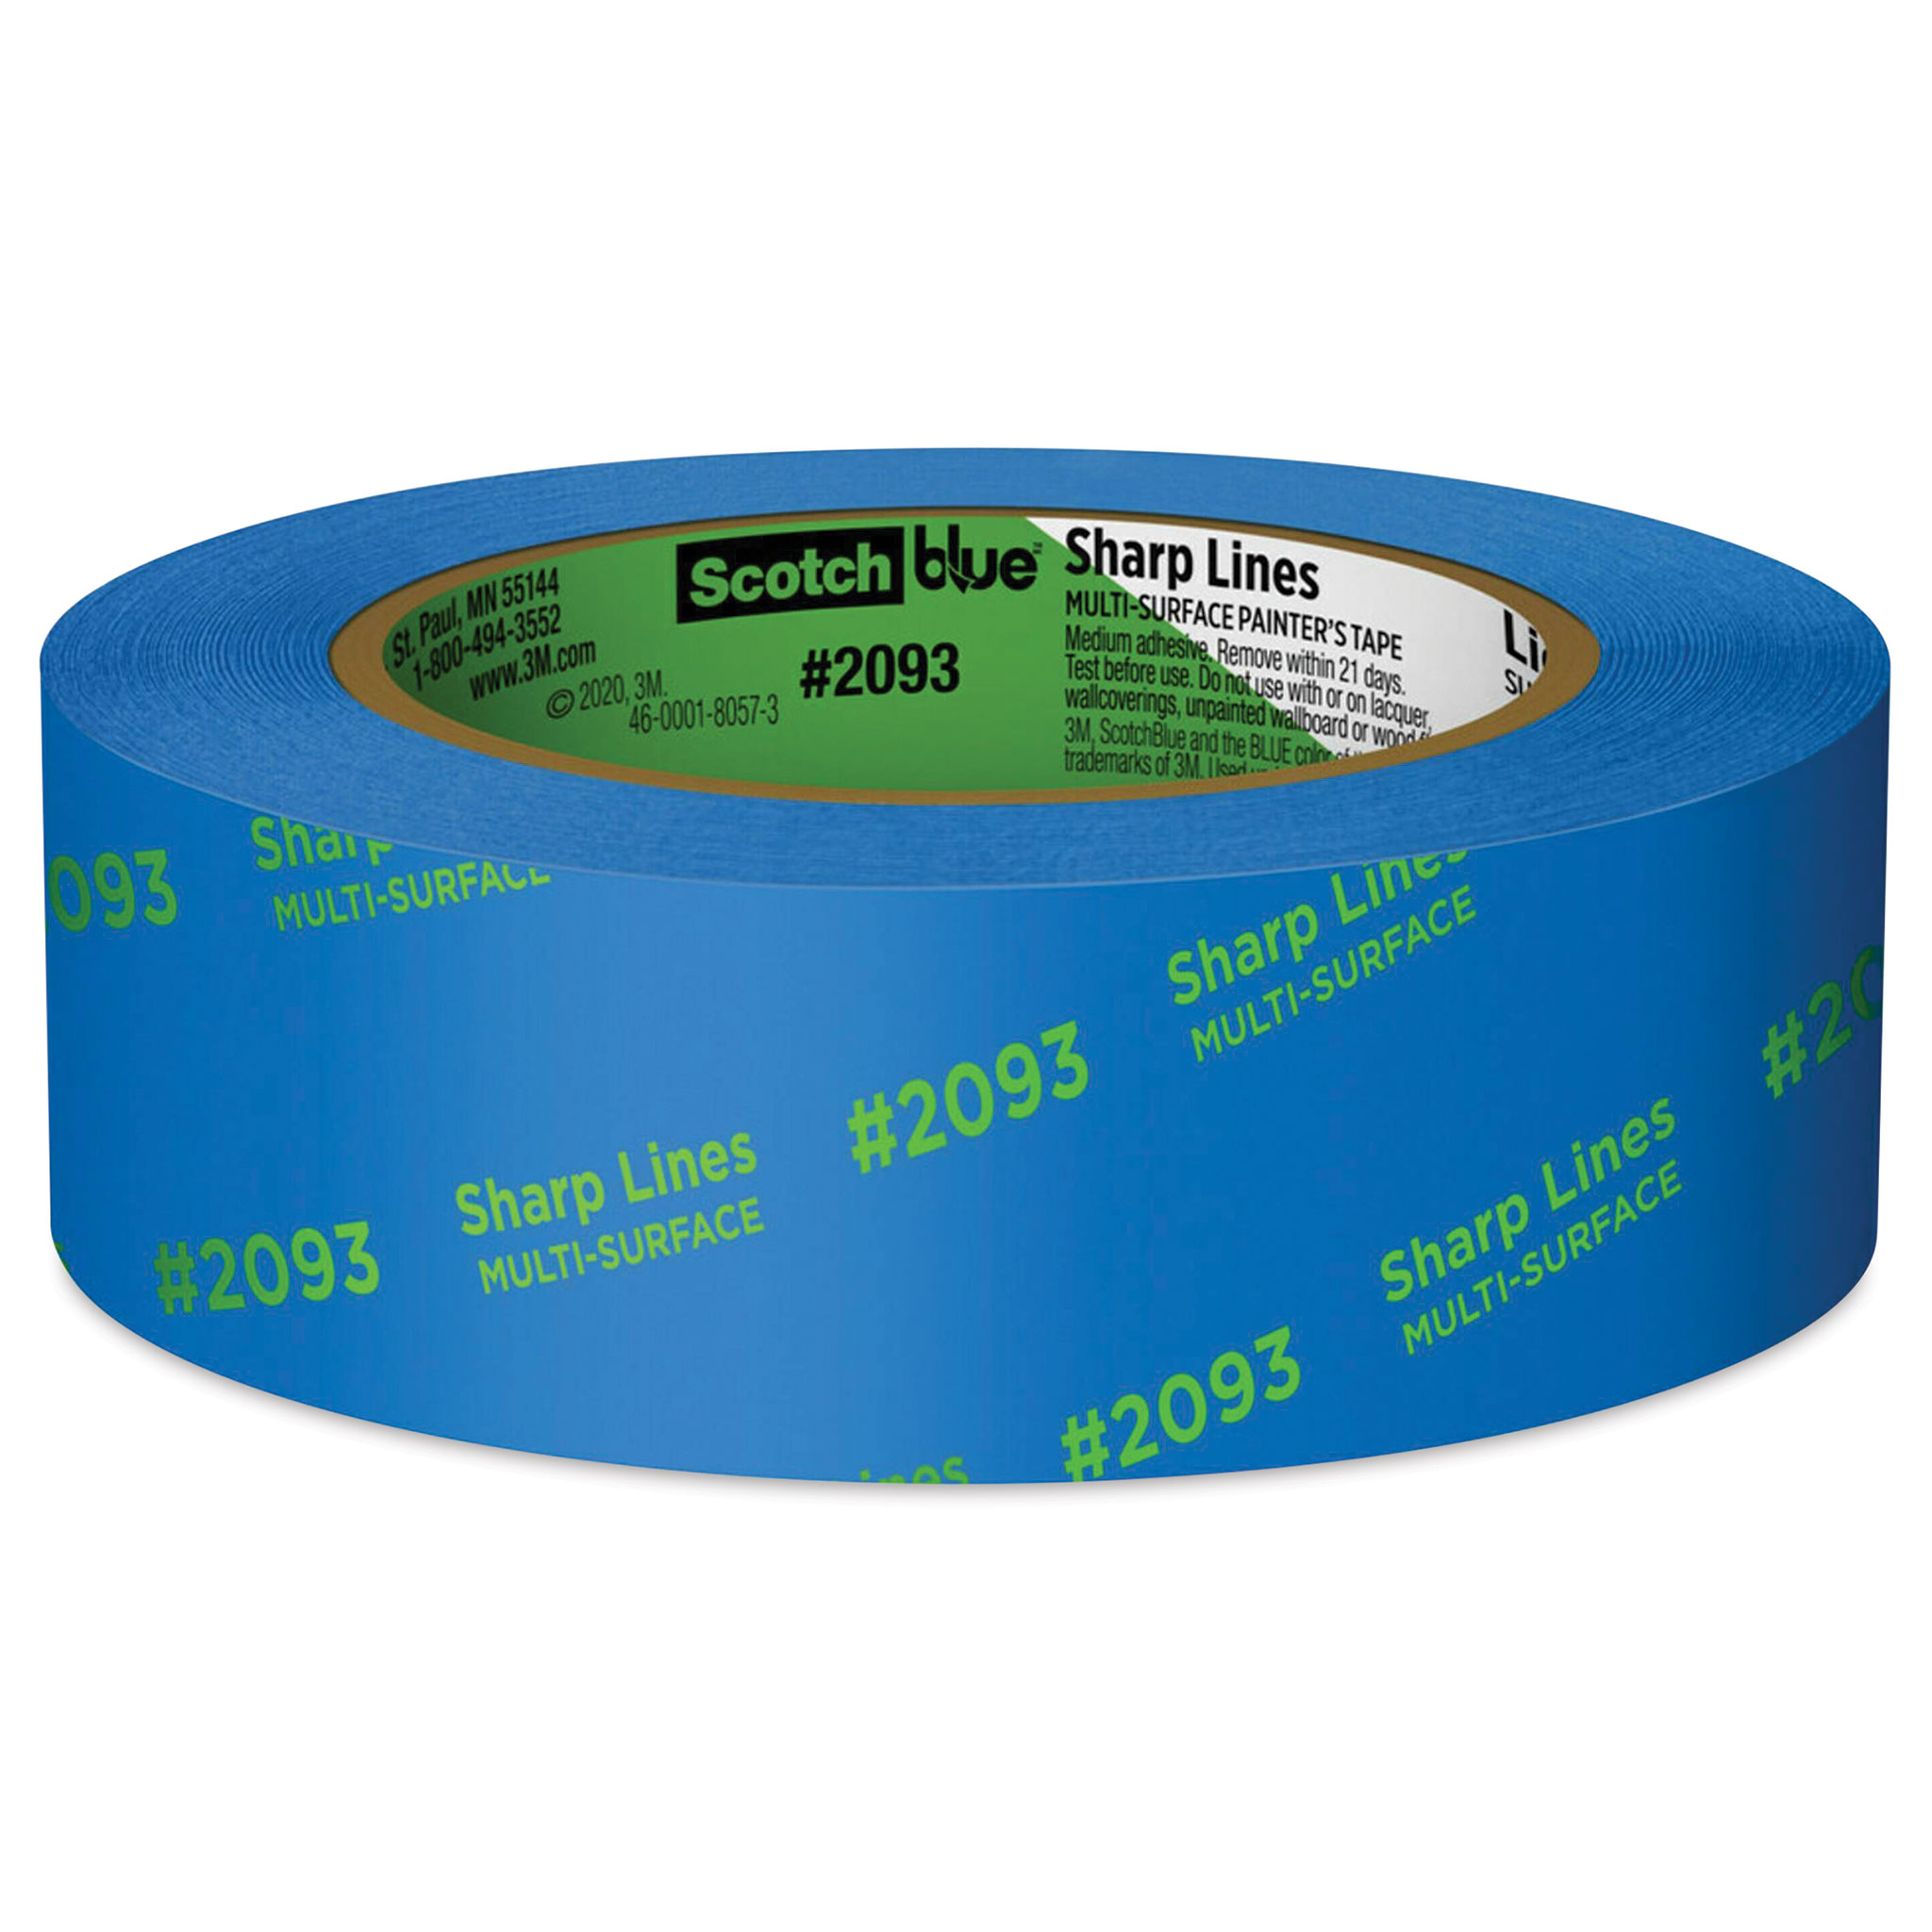 Colored Masking Tape,colored Painters Tape For Arts And Crafts, Labeling Or  Coding - 6 Different Co